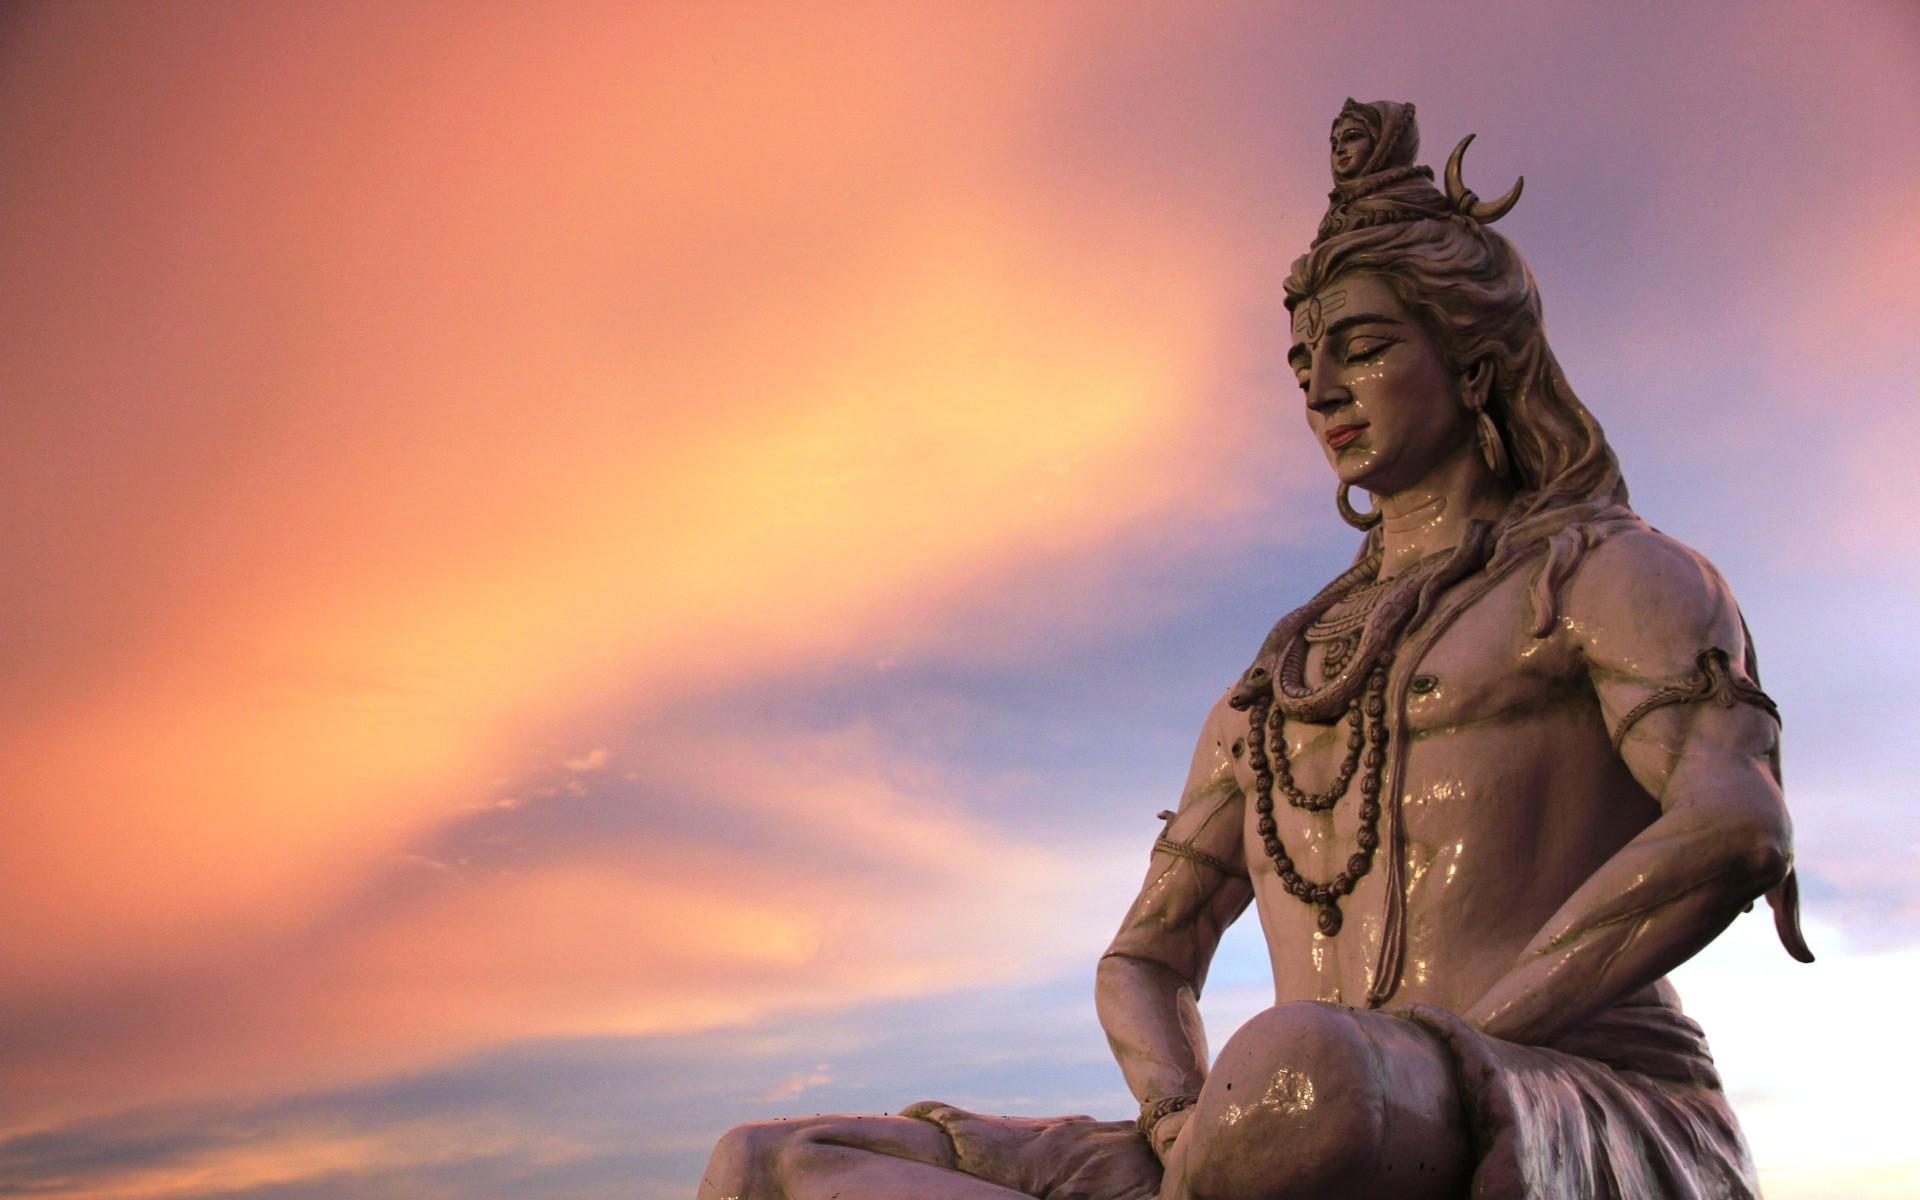 Lord Shiva Wallpapers High Resolution